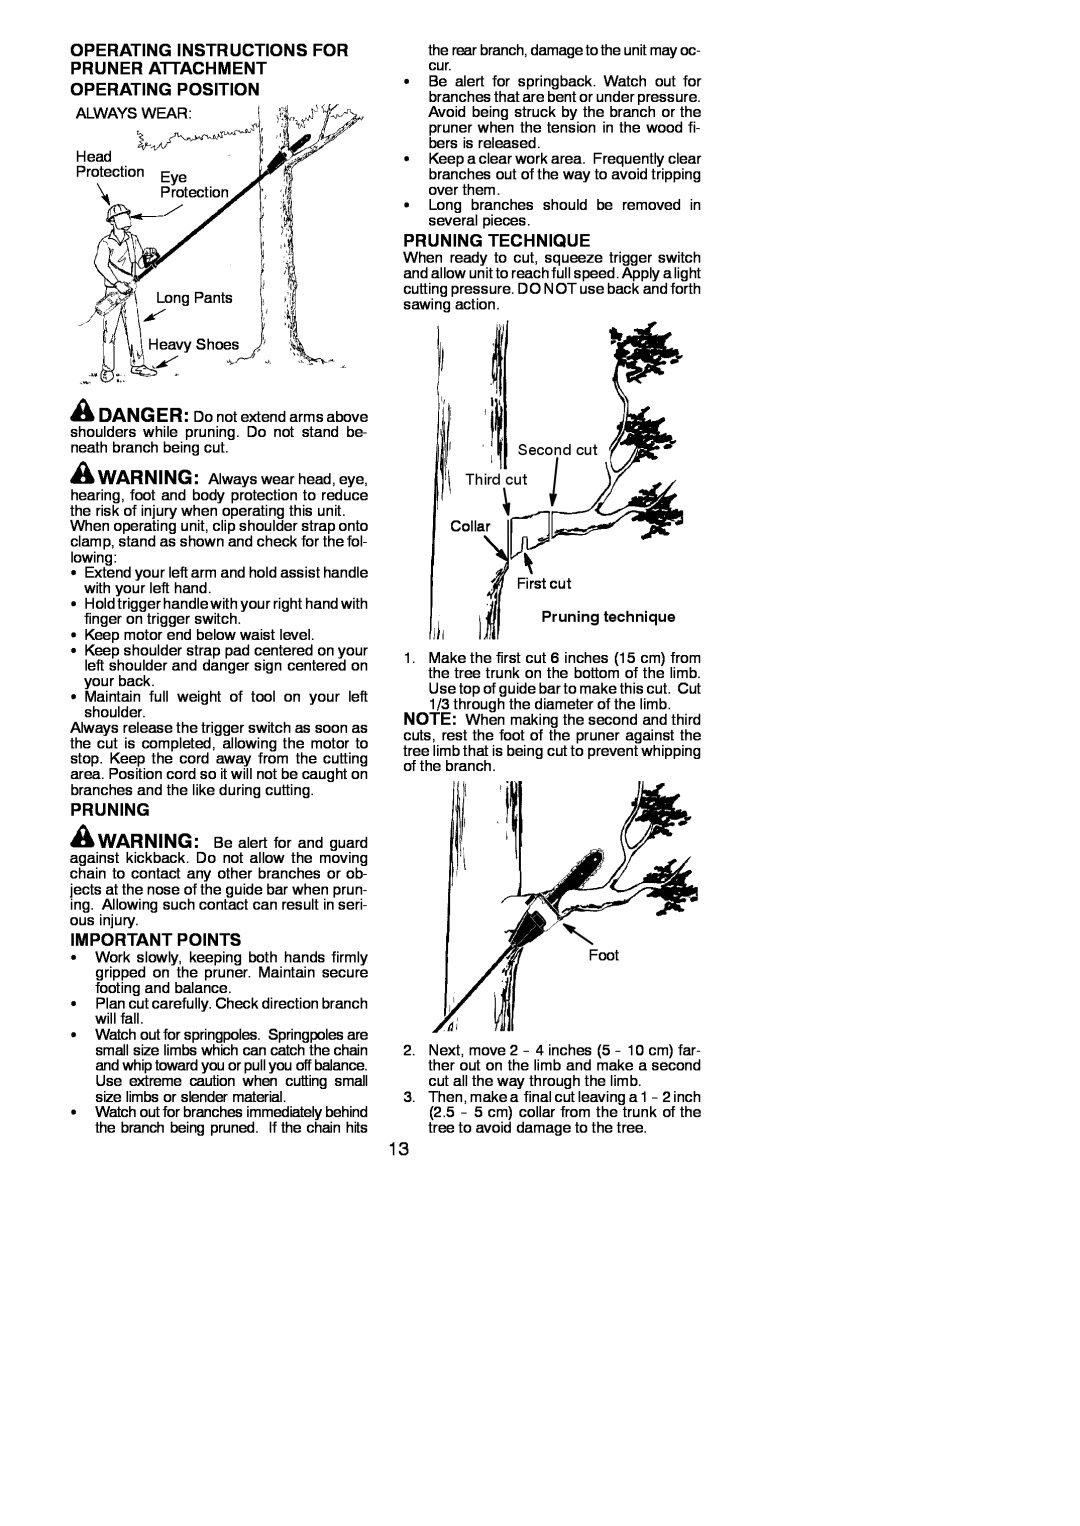 Poulan 810 EPT Operating Instructions For Pruner Attachment, Operating Position, Pruning, Important Points 